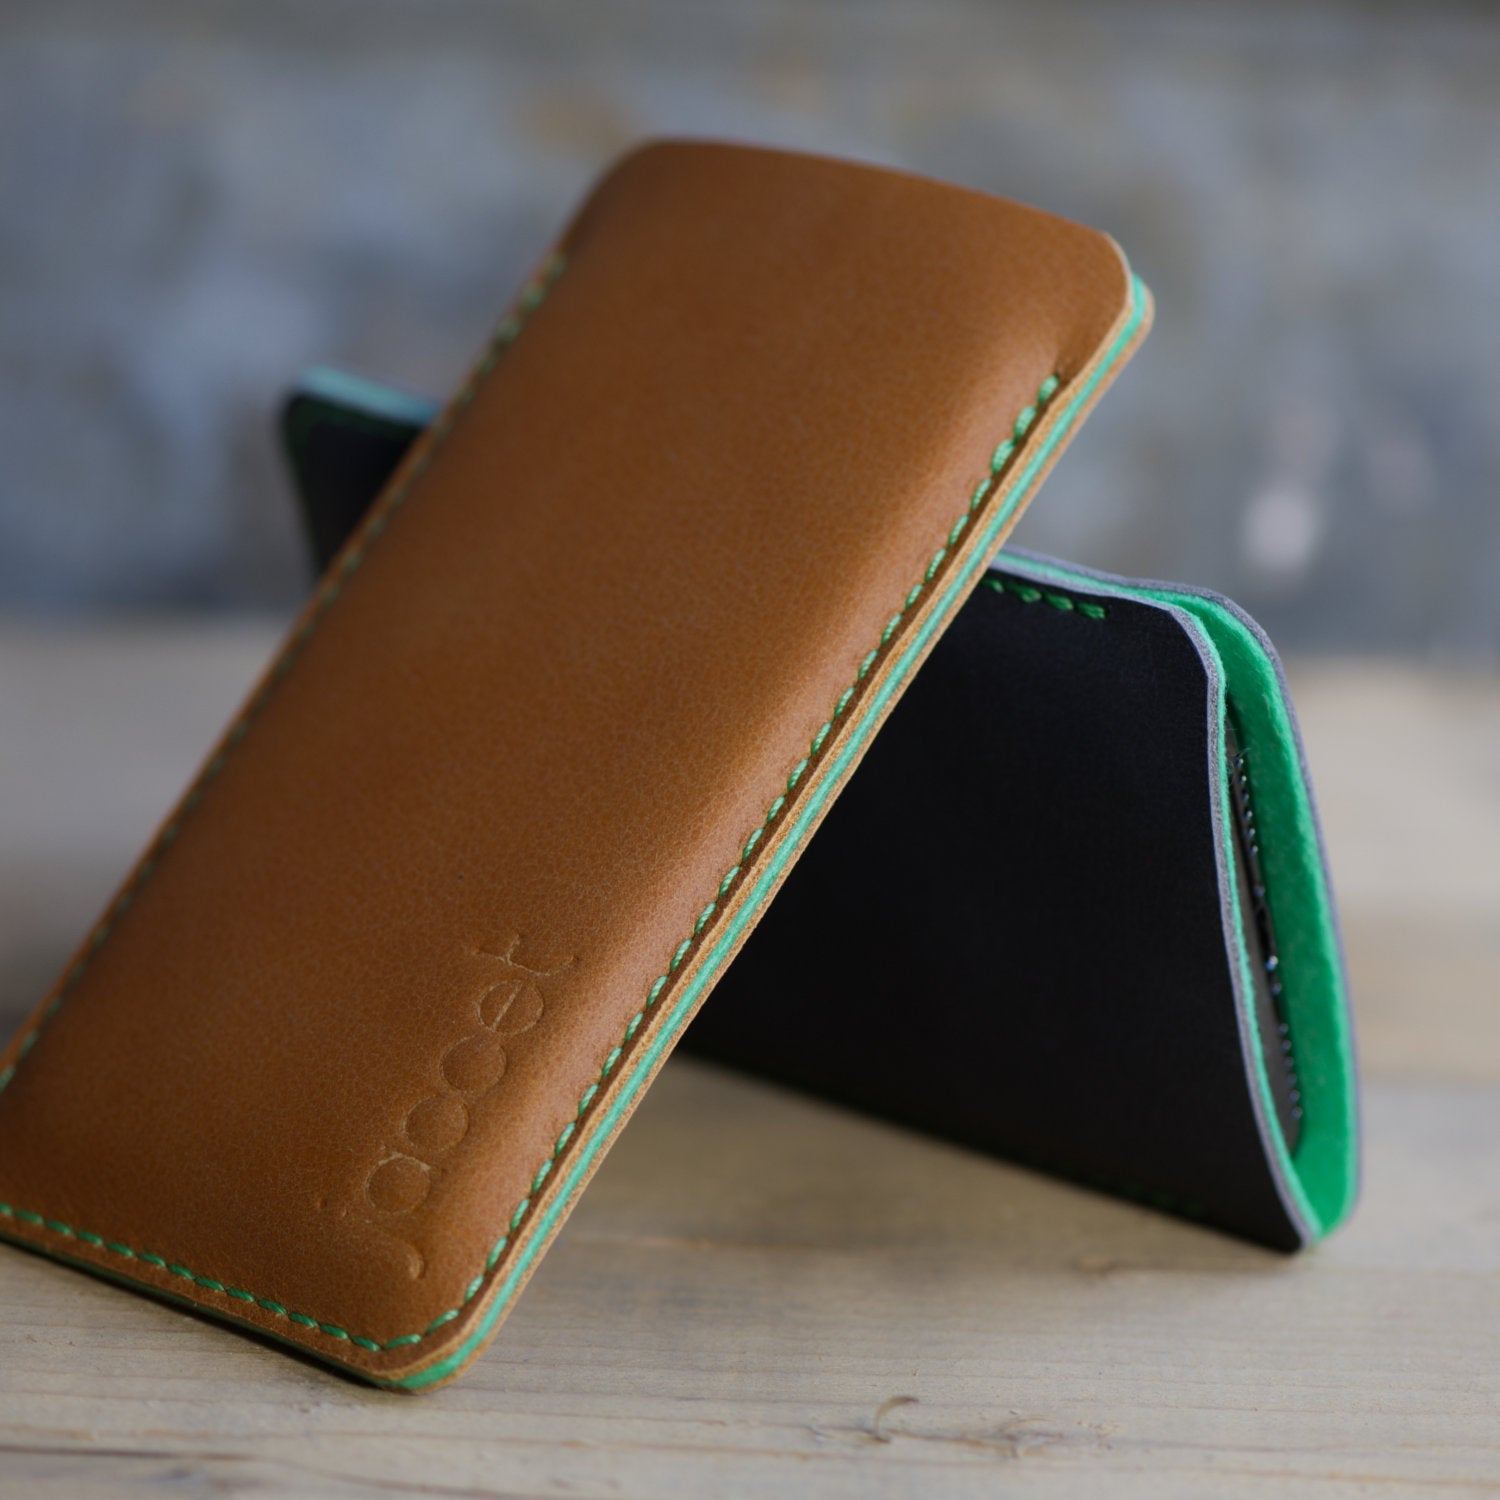 JACCET leather OPPO sleeve - Cognac color leather with green wool felt - 100% Handmade